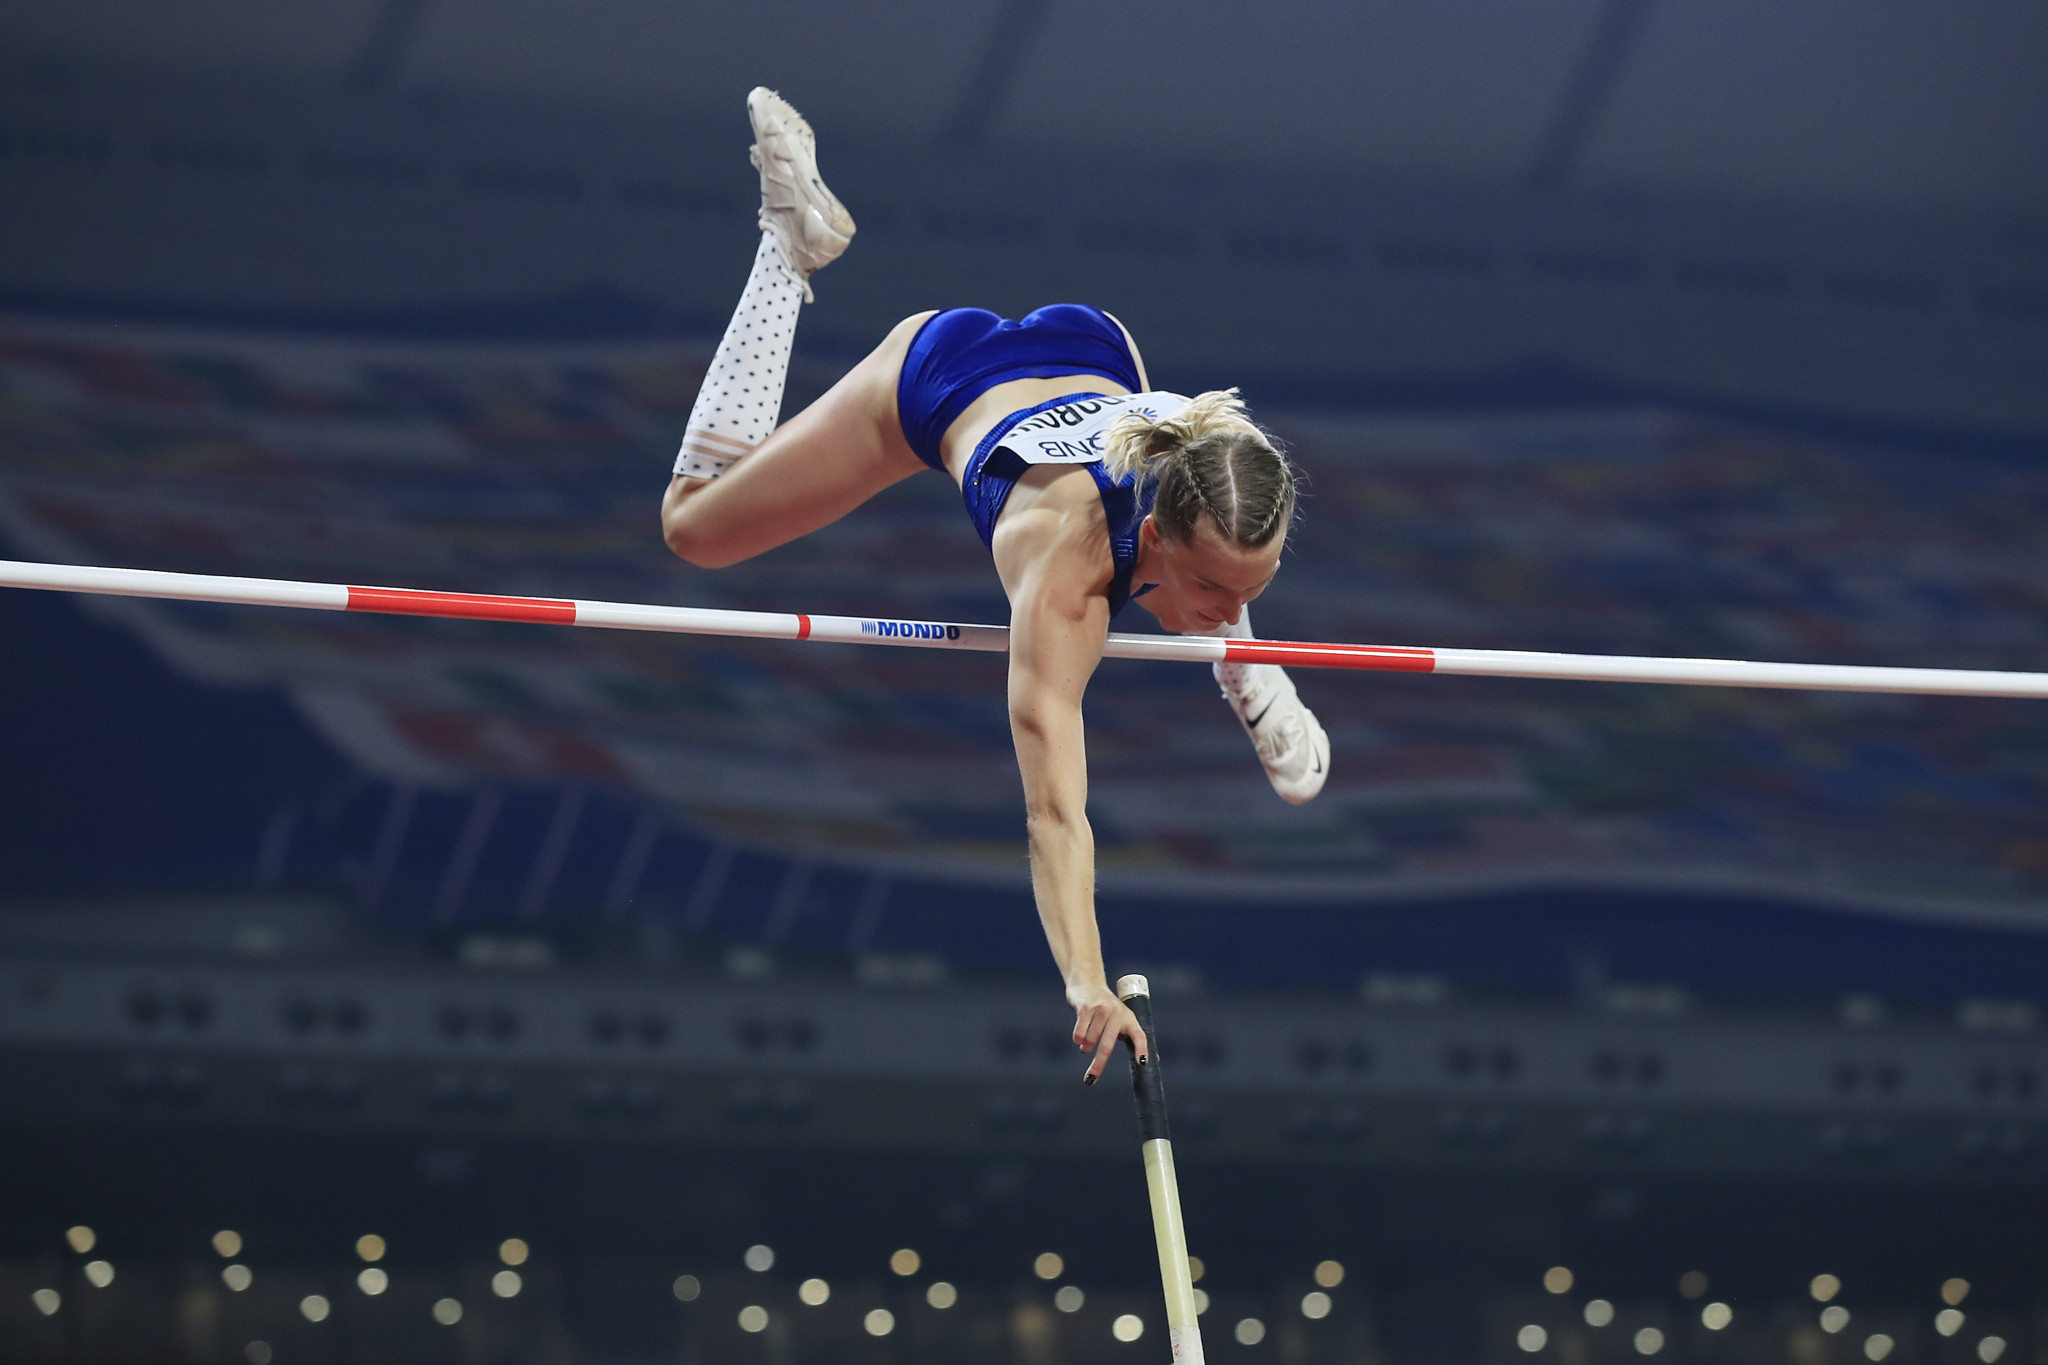 Russia's Anzhelika Sidorova, competing as an Authorised Neutral Athlete, won an enthralling women's pole vault ©Getty Images